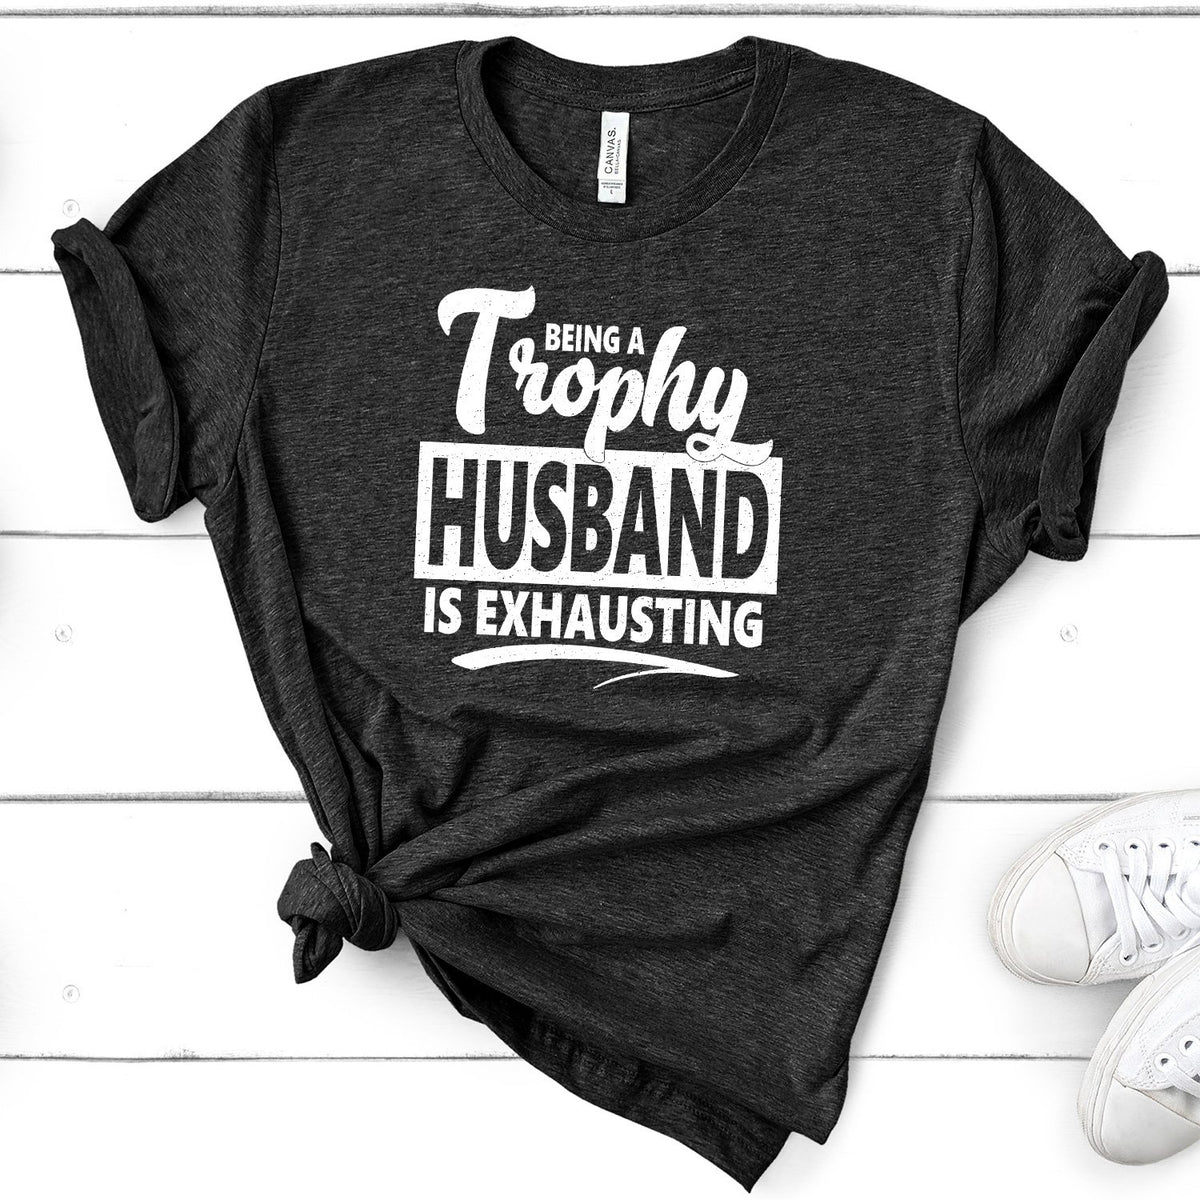 Being A Trophy Husband is Exhausting - Short Sleeve Tee Shirt